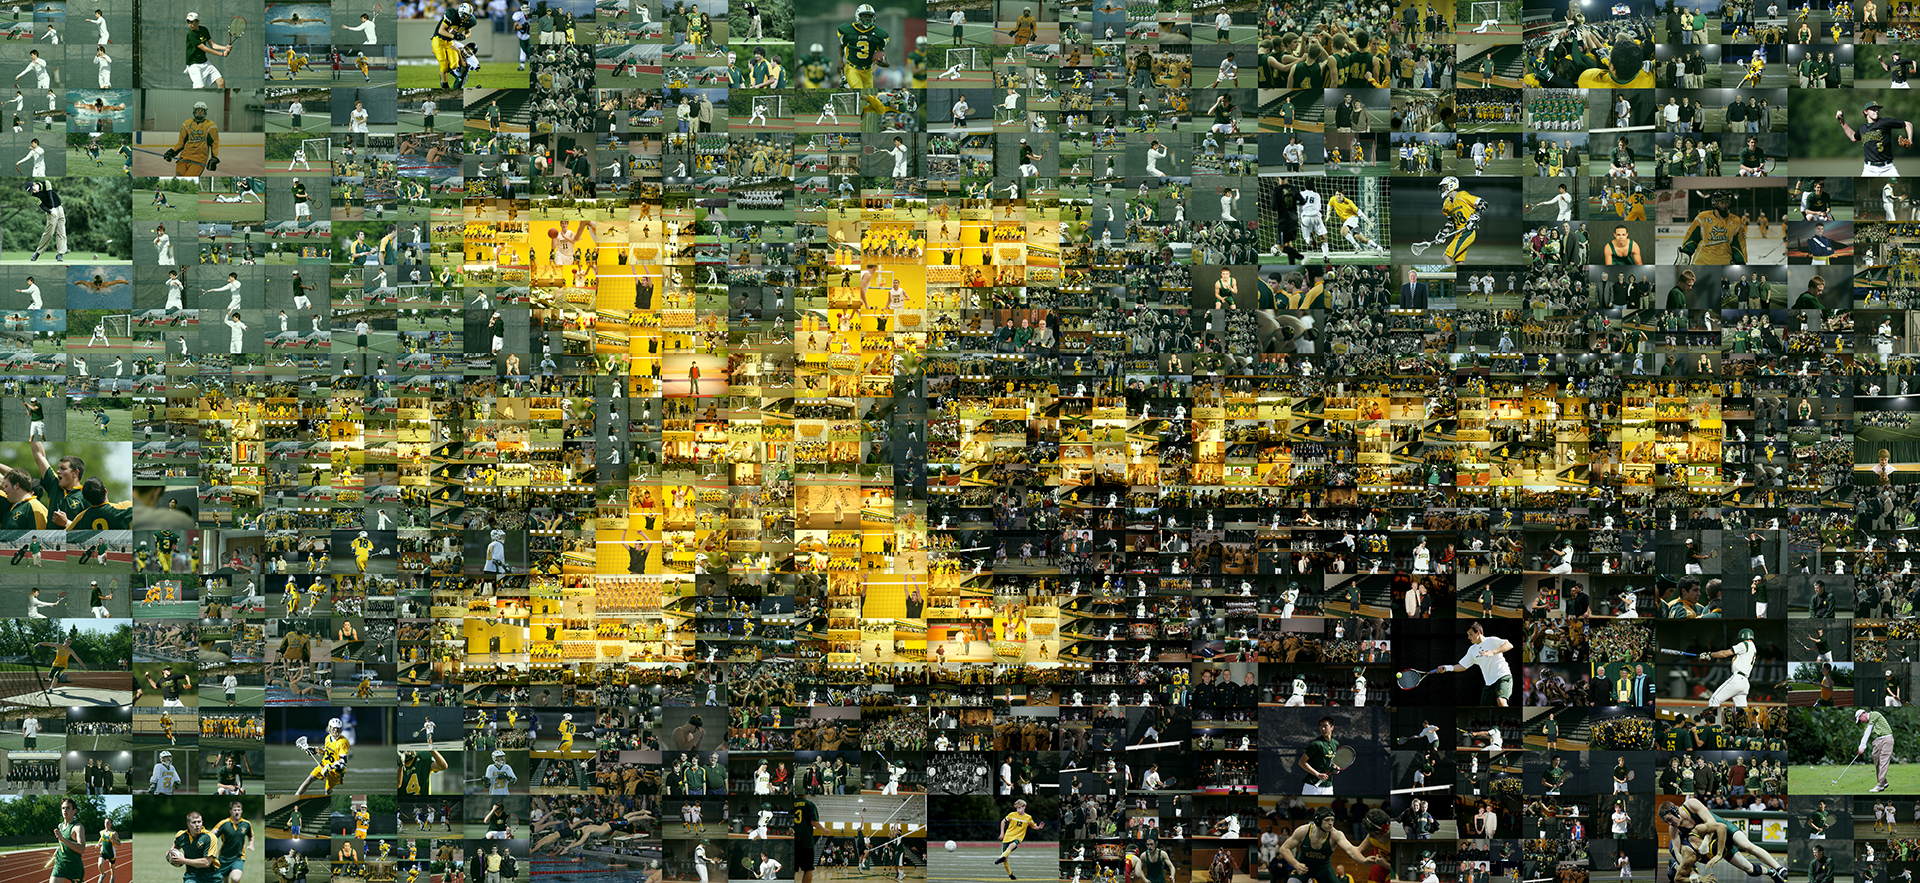 photo mosaic A unique multi-size cell mosaic created using over 1,300 school sports photos